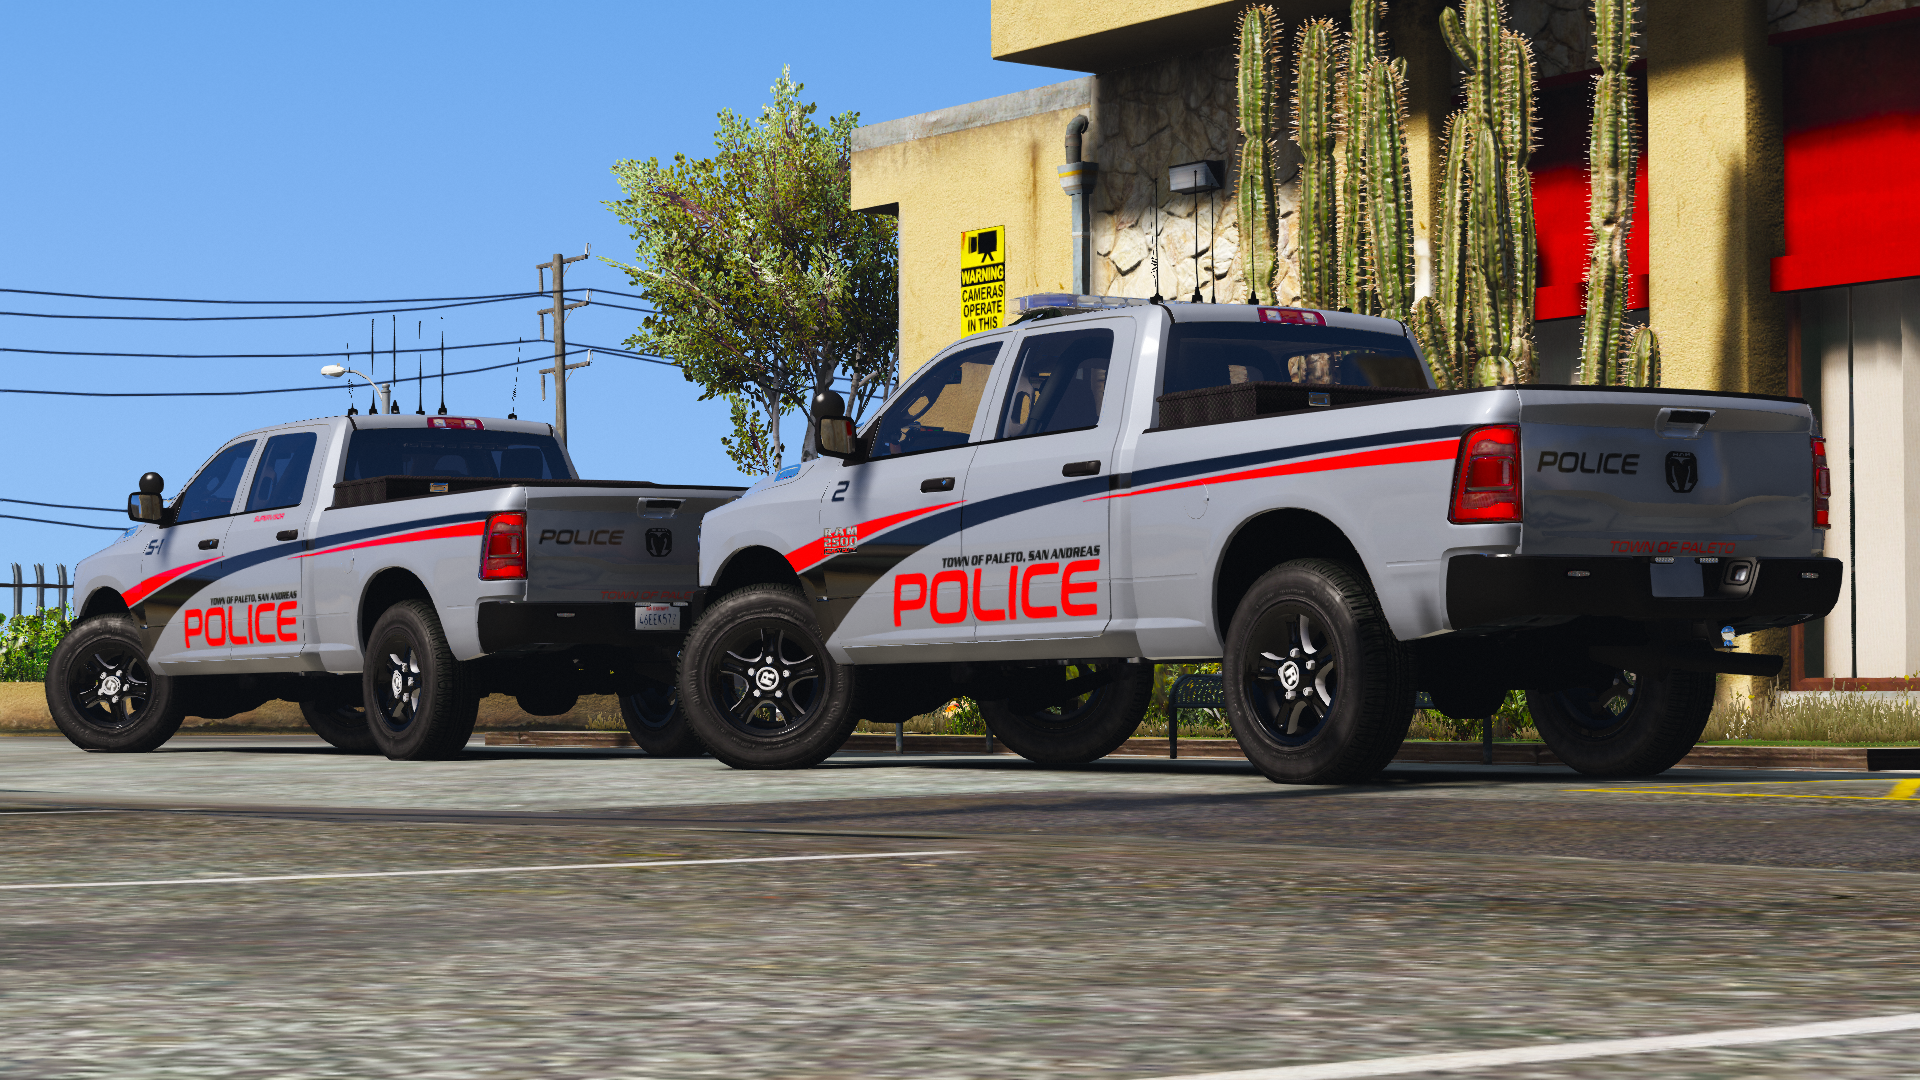 Grand_Theft_Auto_V_19_06_2020_23_32_32.png.f43a184103cc0a6cefb55d8ed1b57c4a.png